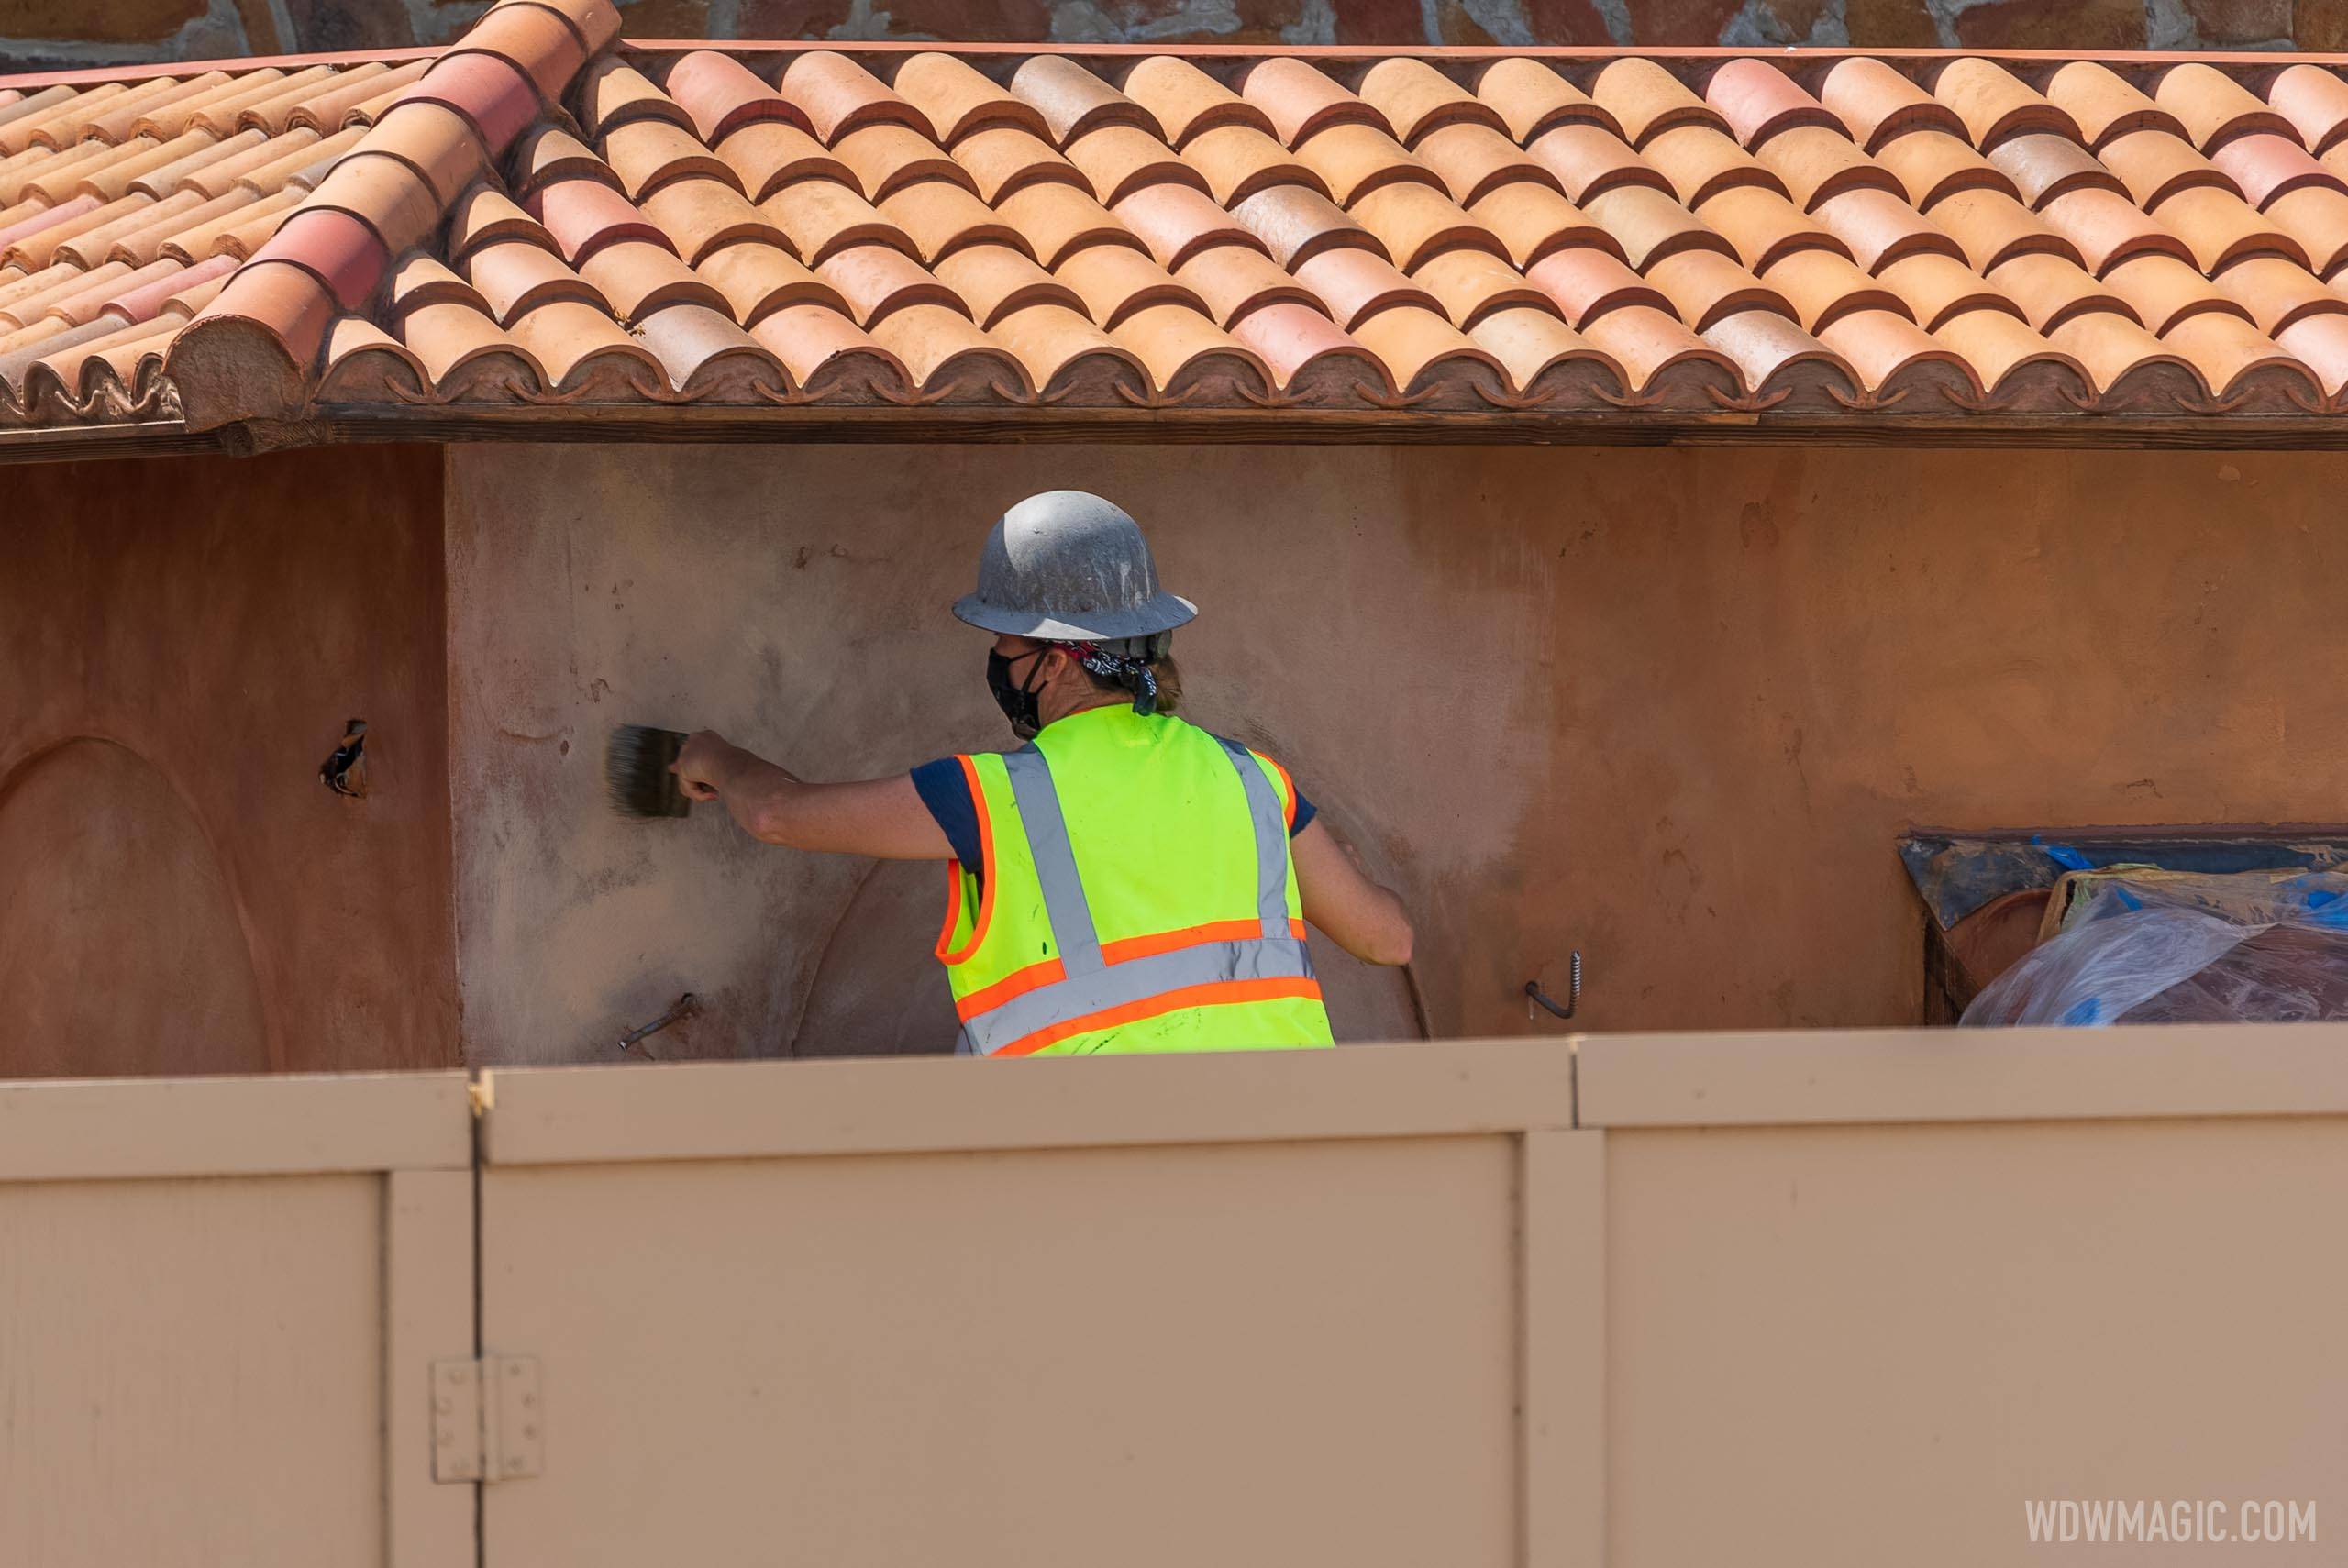 Gelateria Toscana construction continues at EPCOT'S Italy pavilion